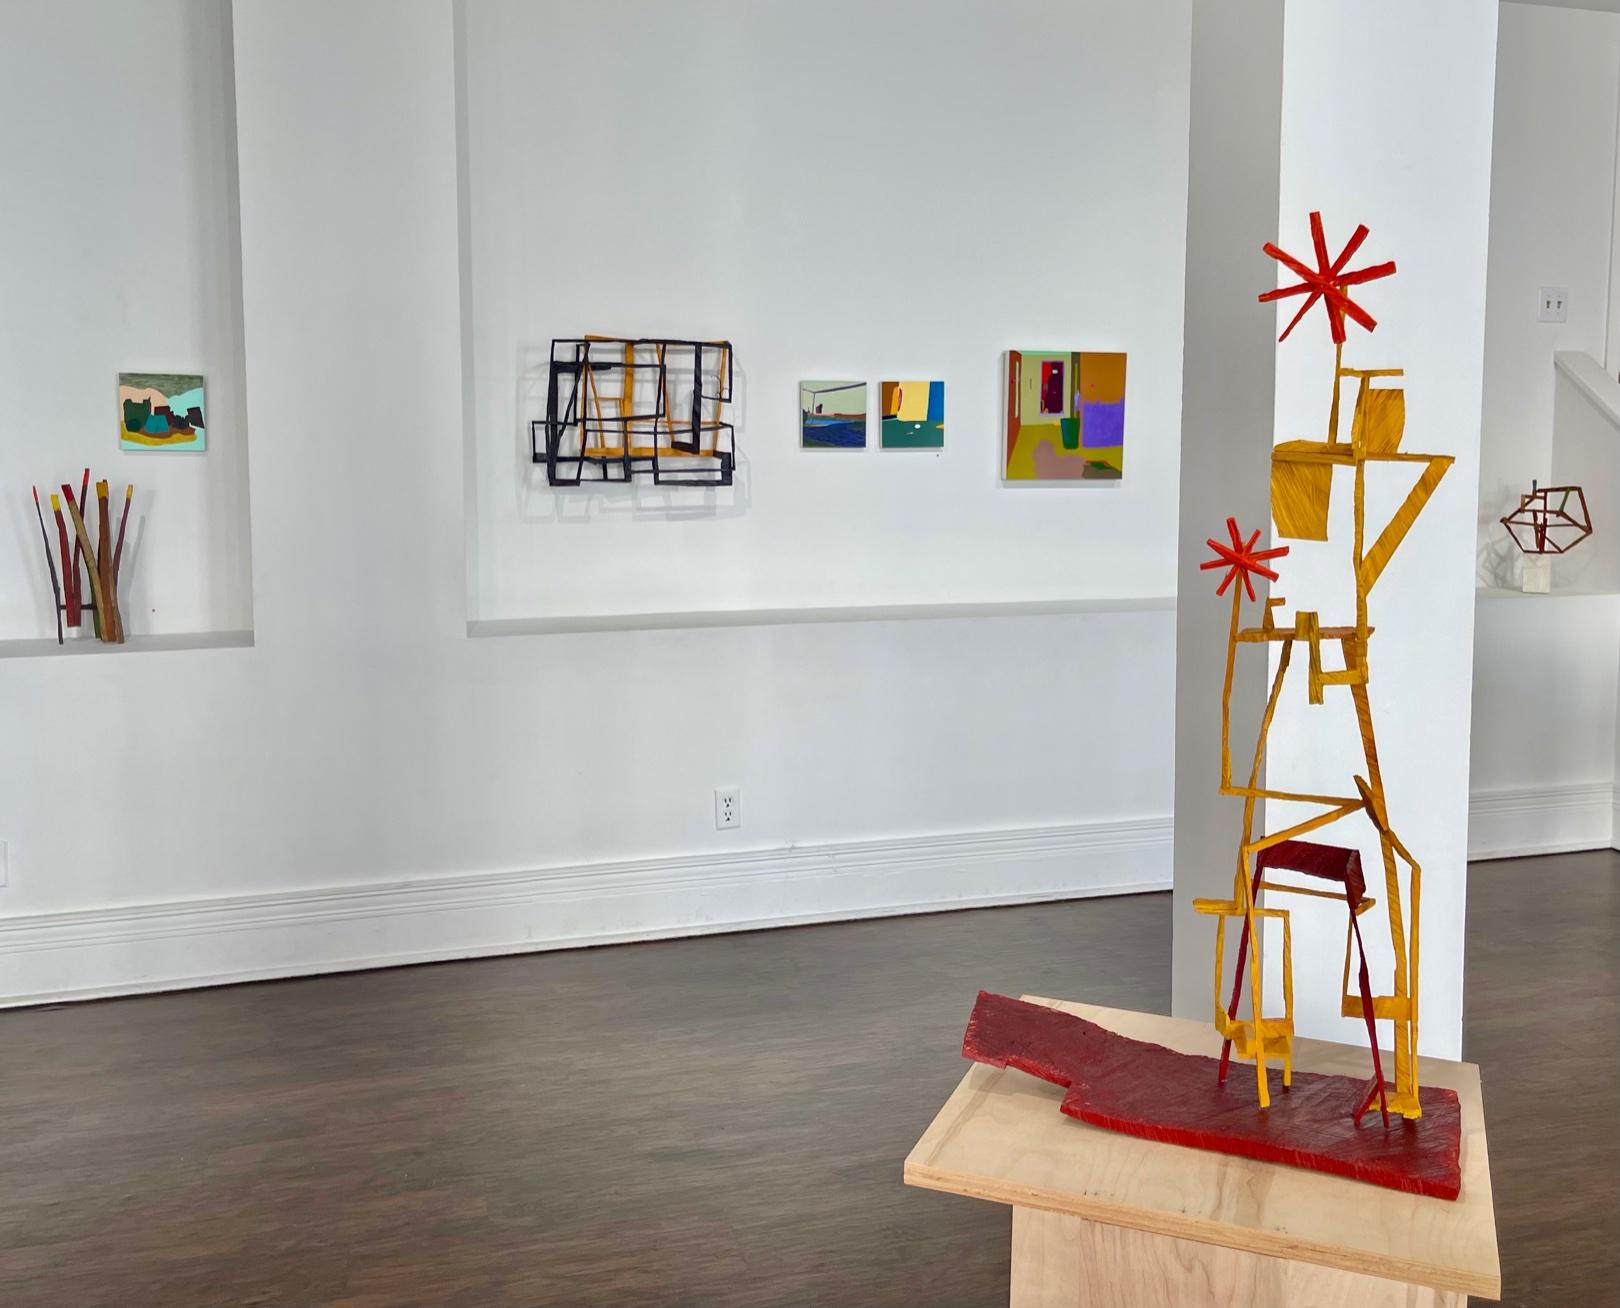 The One Way Girl, bright multicolored abstract geometric wooden sculpture - Sculpture by Joe Sultan